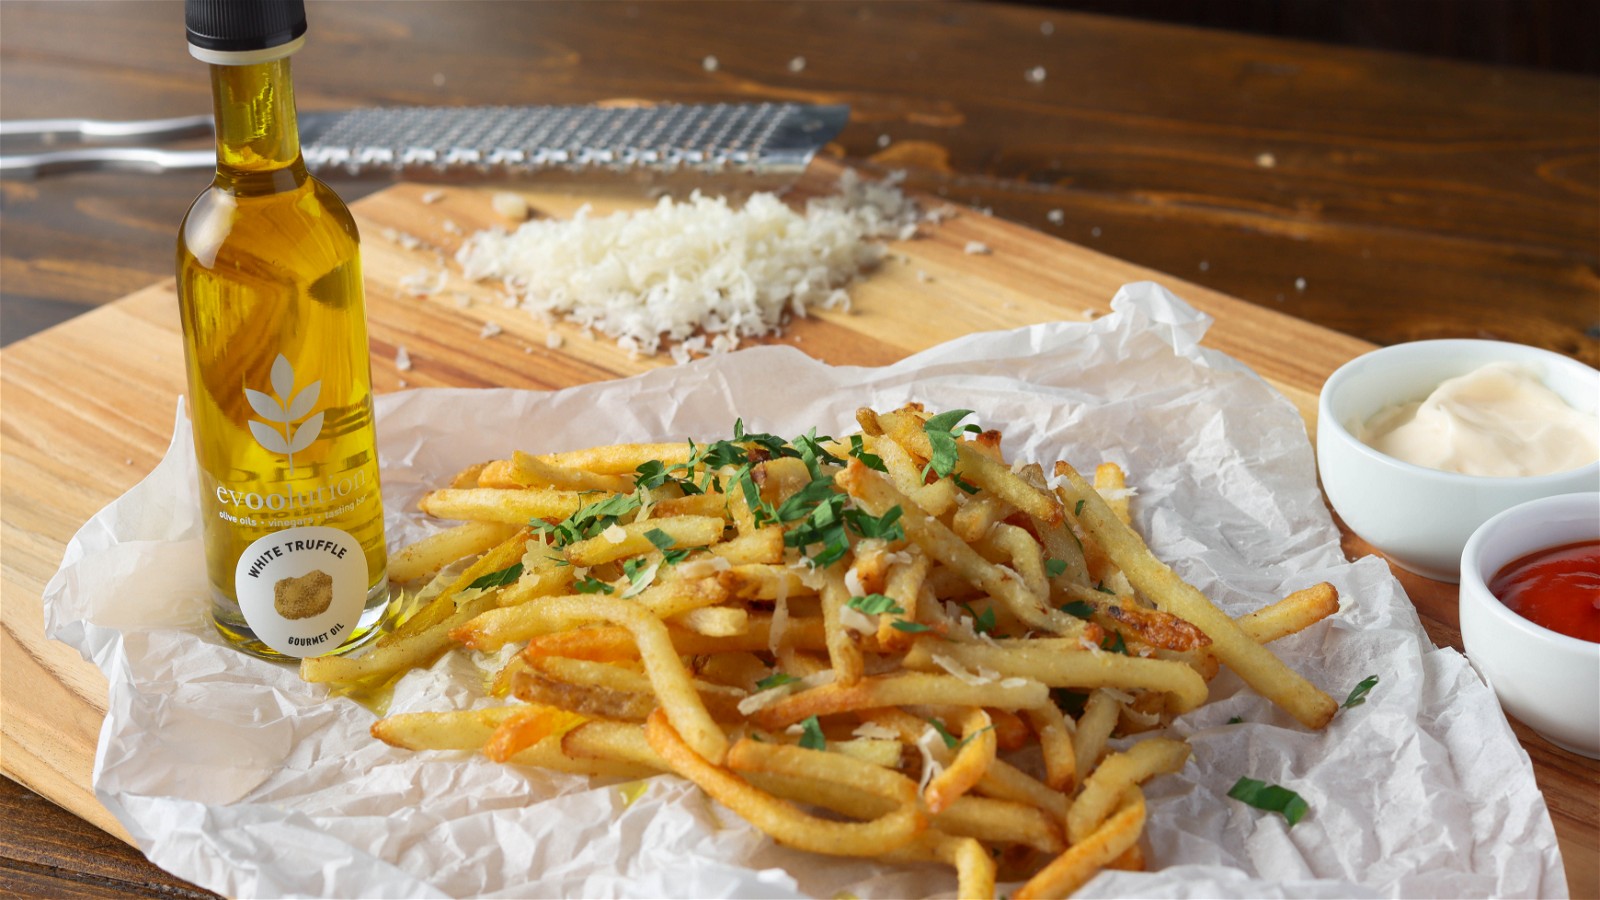 Image of Truffle Parmesan Fries with White Truffle Oil